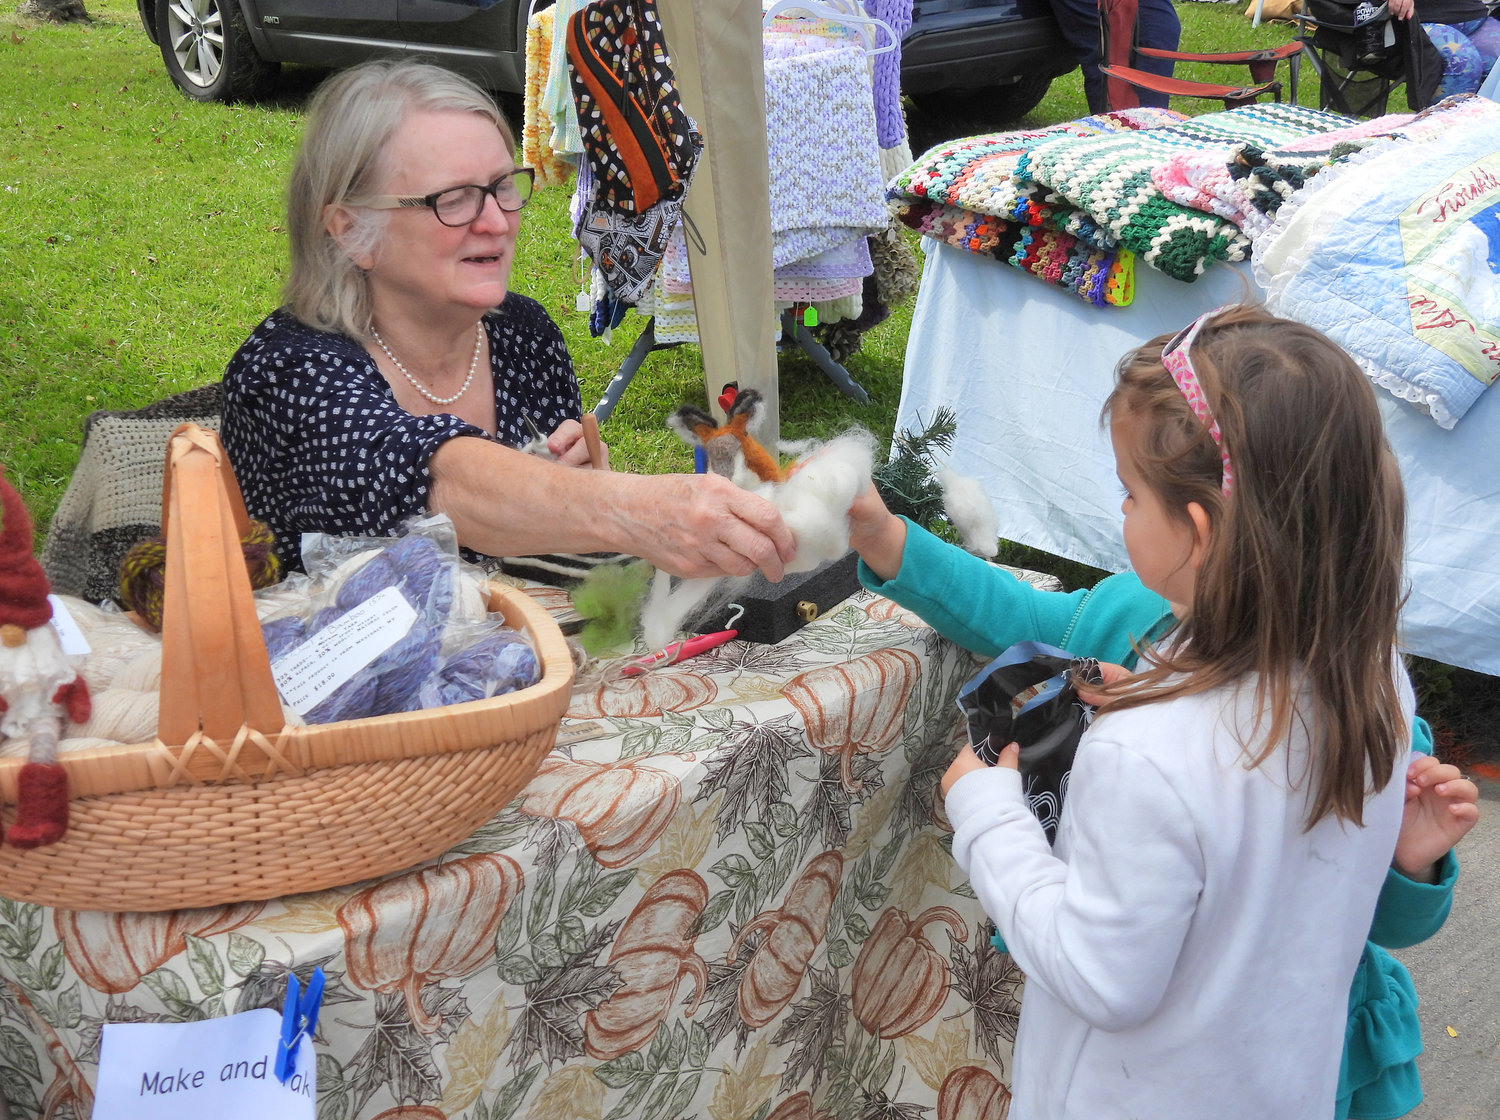 Linda Faber of Faber Farm in Camden shows local children the kind of wool she gets from her sheep farm and how she uses it to make all kinds of crafts via felting at last year’s Fall Fest in Oneida.